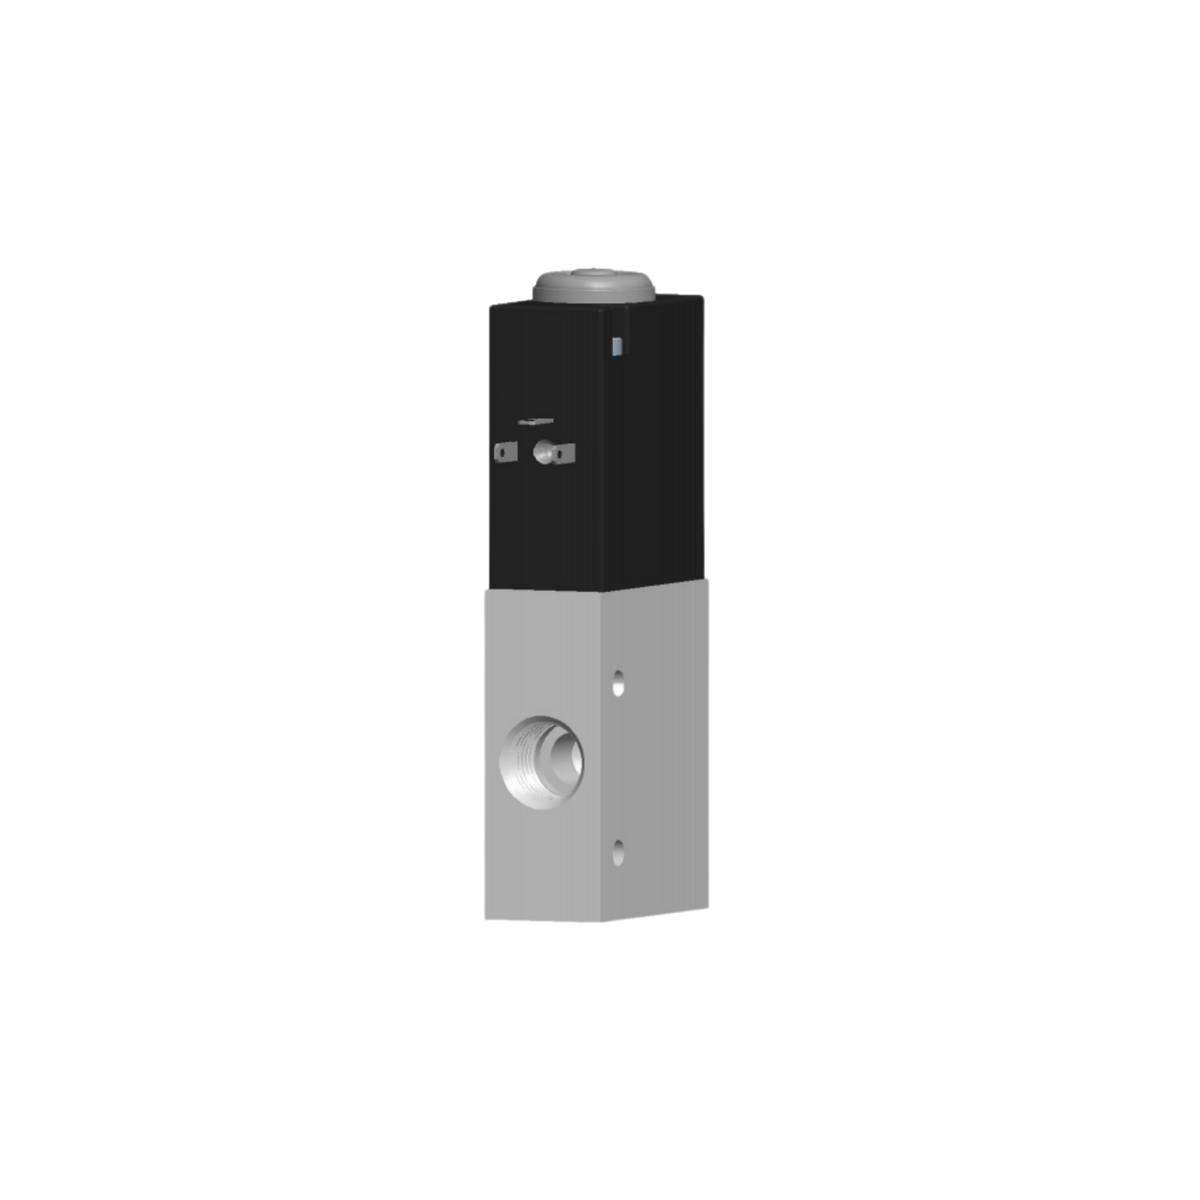 compact rectangular upright solenoid valve with an aluminum bottom with one port, and a black material on the top with an electrical plug